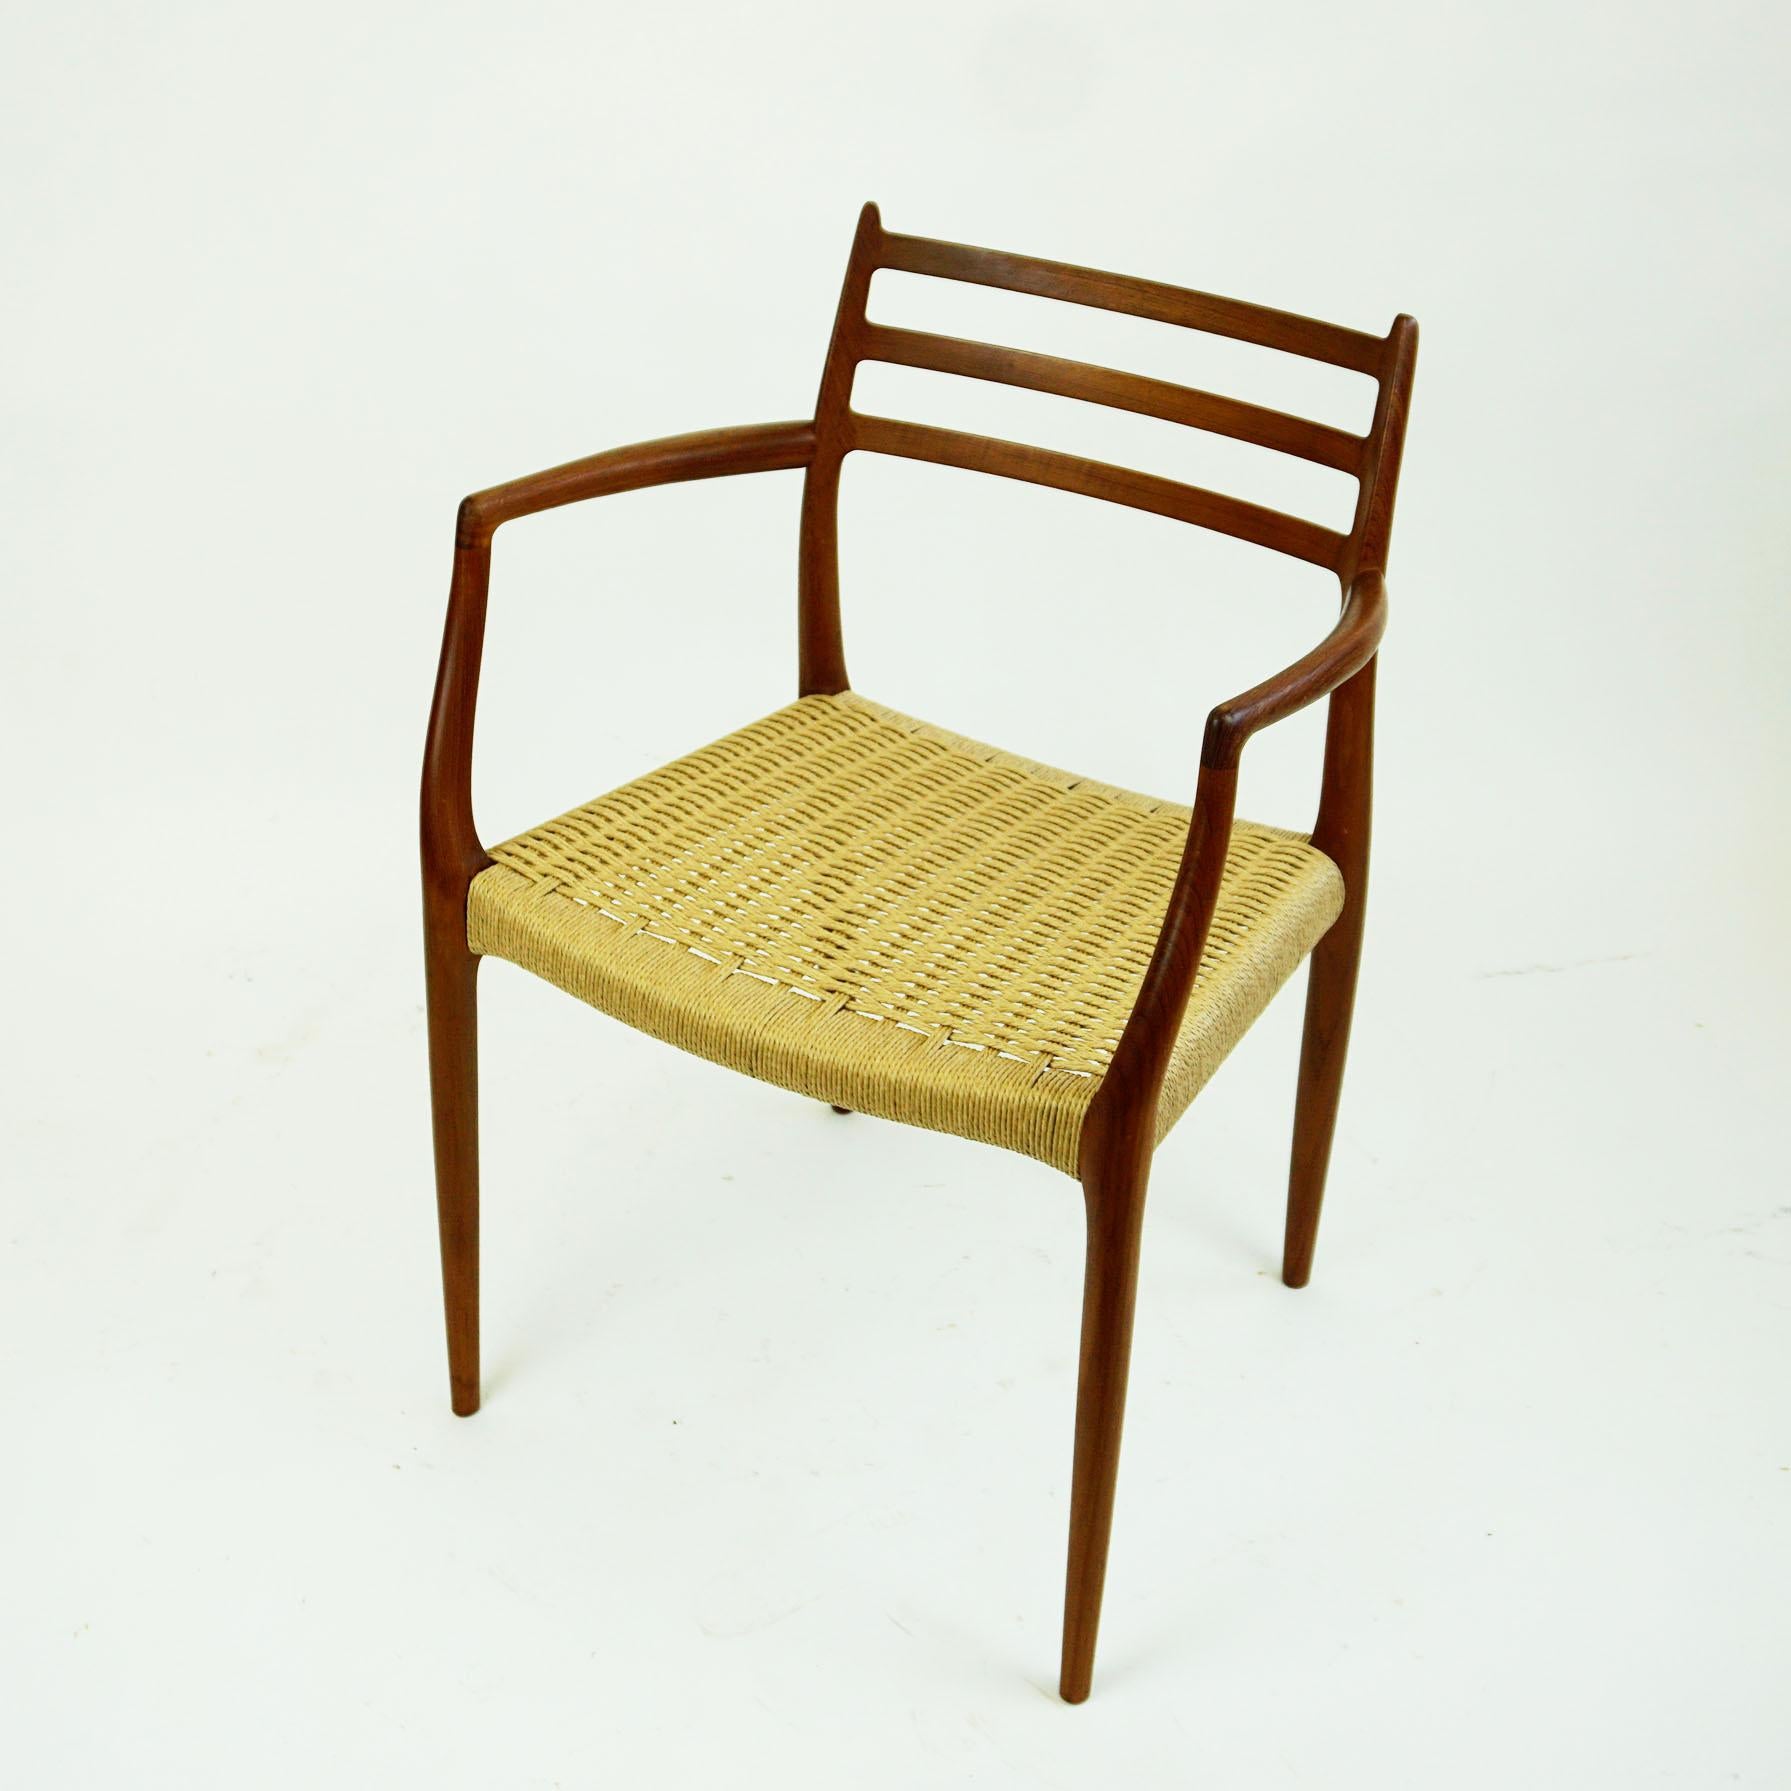 Rare and iconic Scandinavian Modern Mod. 62 teak dining armchair designed by Niels Otto Moller for his own company: J.L. Moller Mobelfabrik in Denmark, 1962. This piece is in excellent condition and features a newly woven papercord seat. Danish